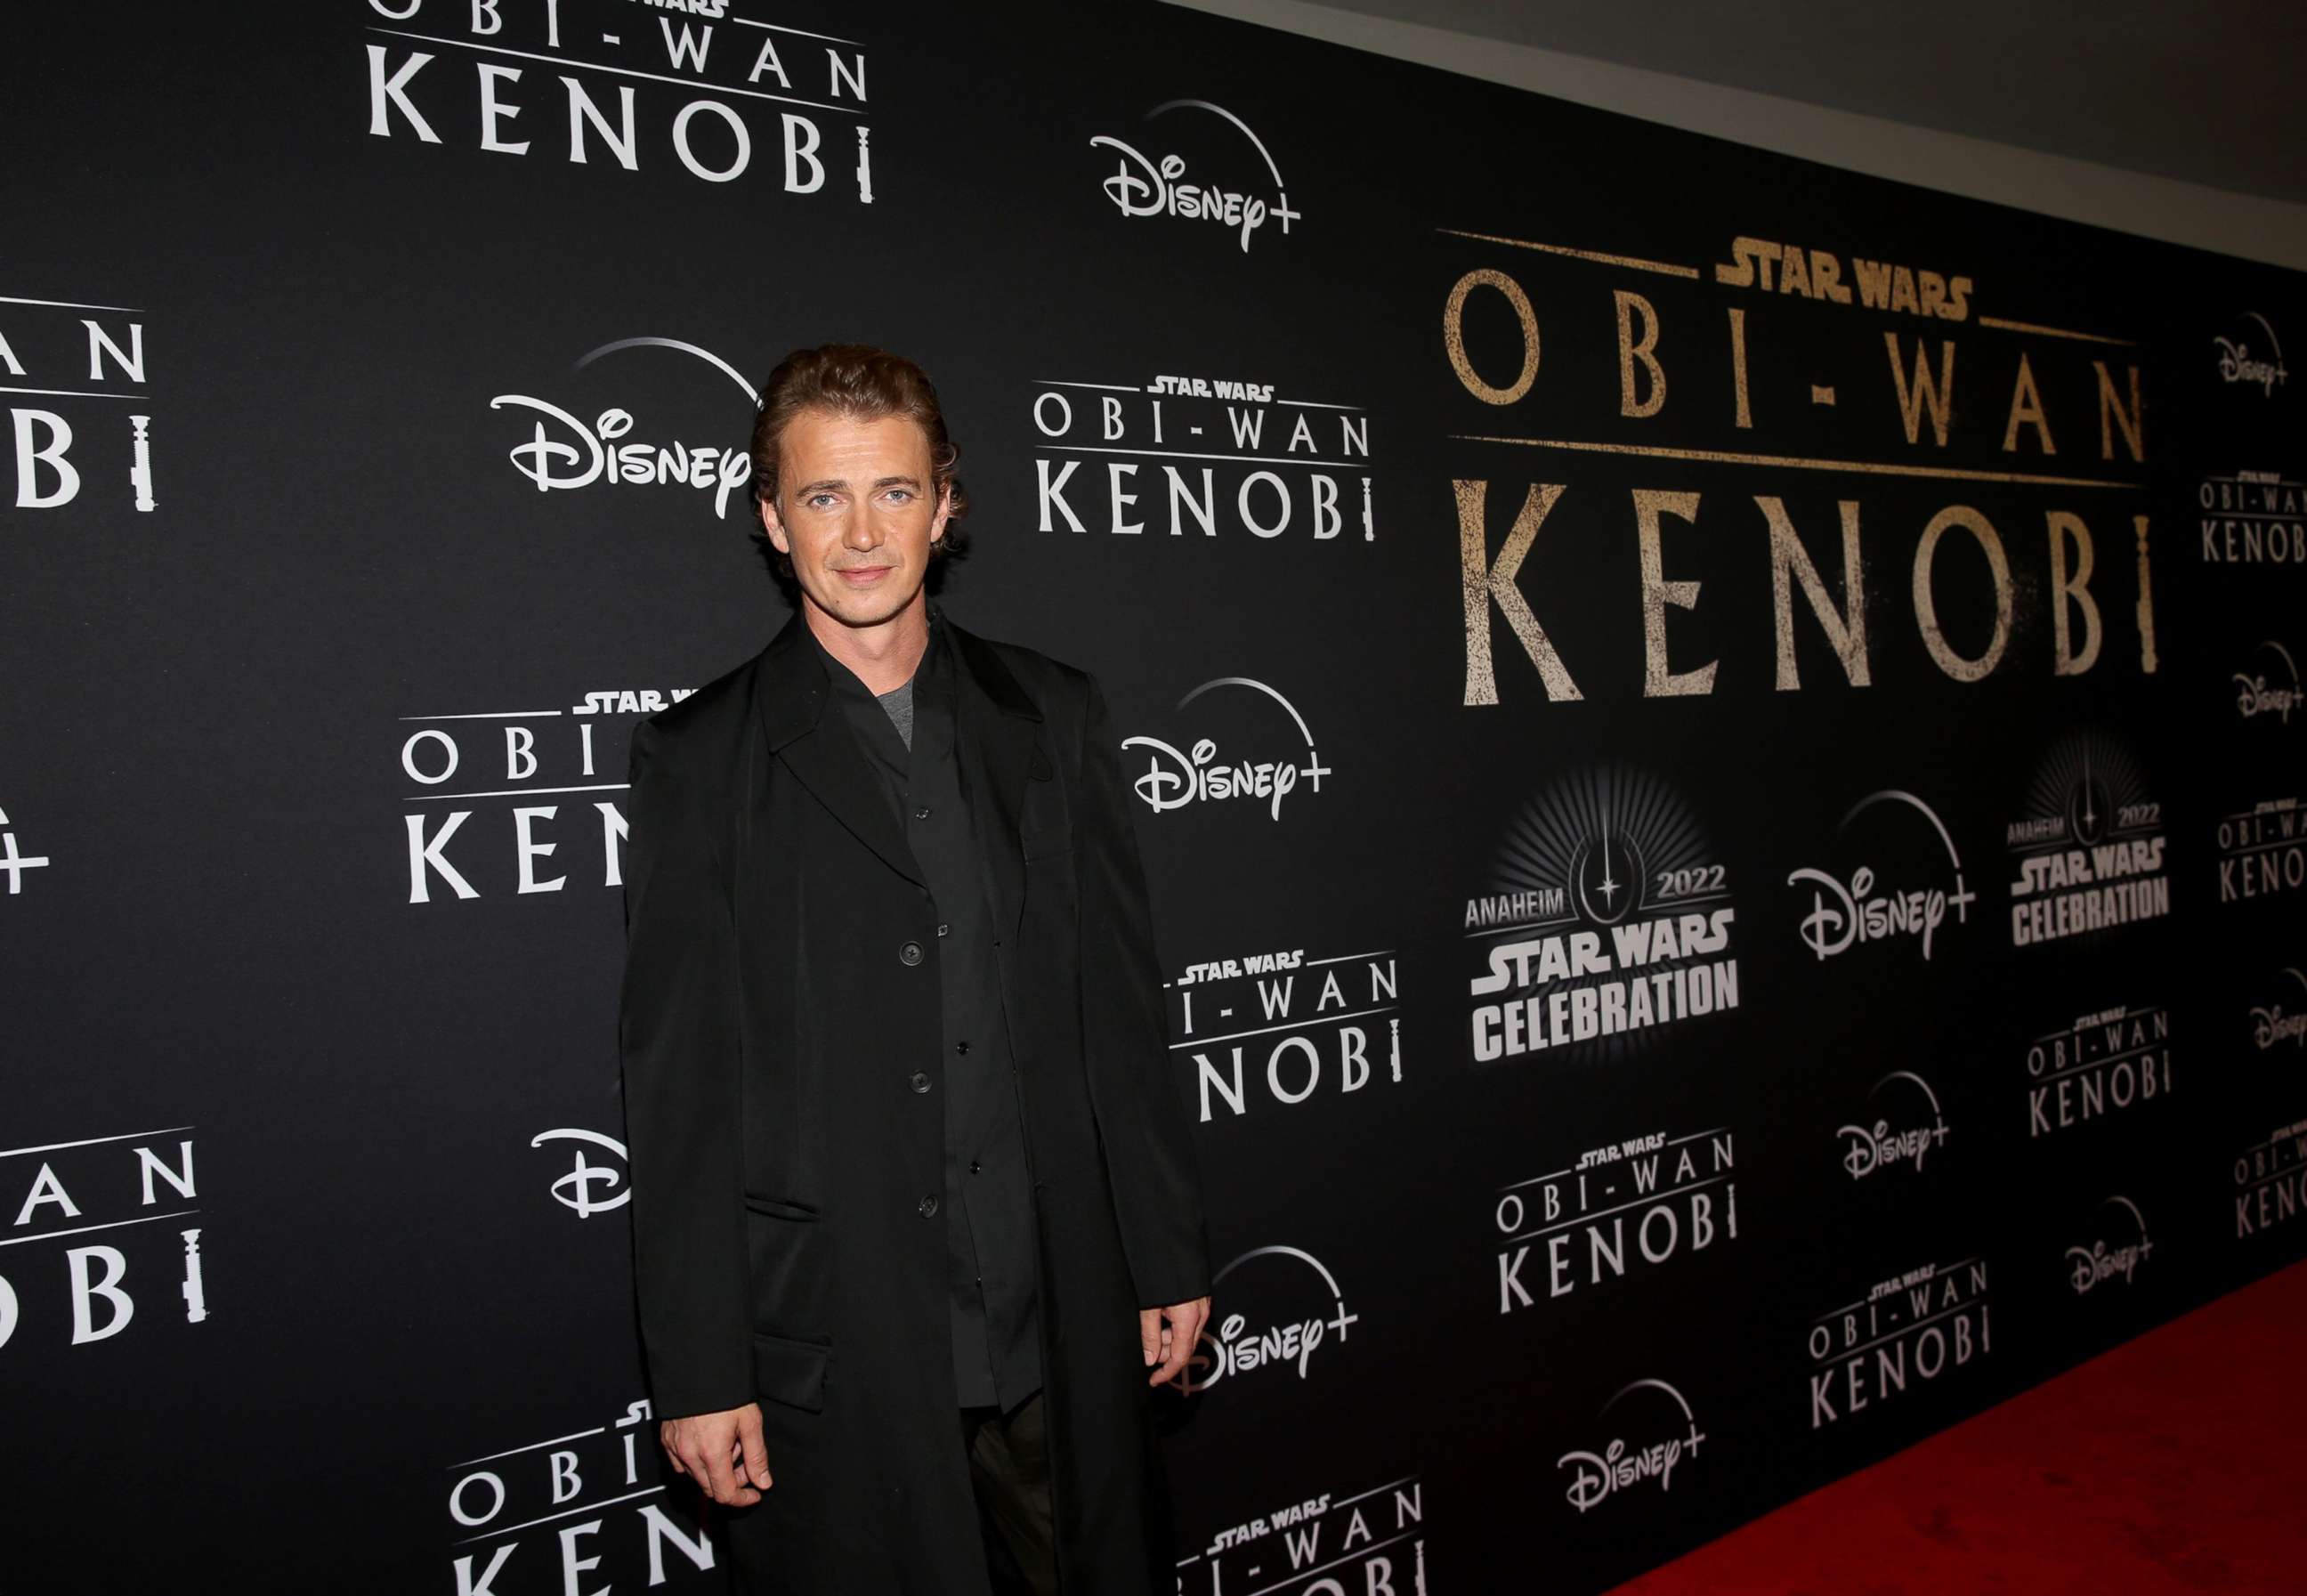 PHOTO: Hayden Christensen attends a premiere of the first two episodes of "Obi-Wan Kenobi" at a Star Wars Celebration in Anaheim, Calif. on May 26, 2022.